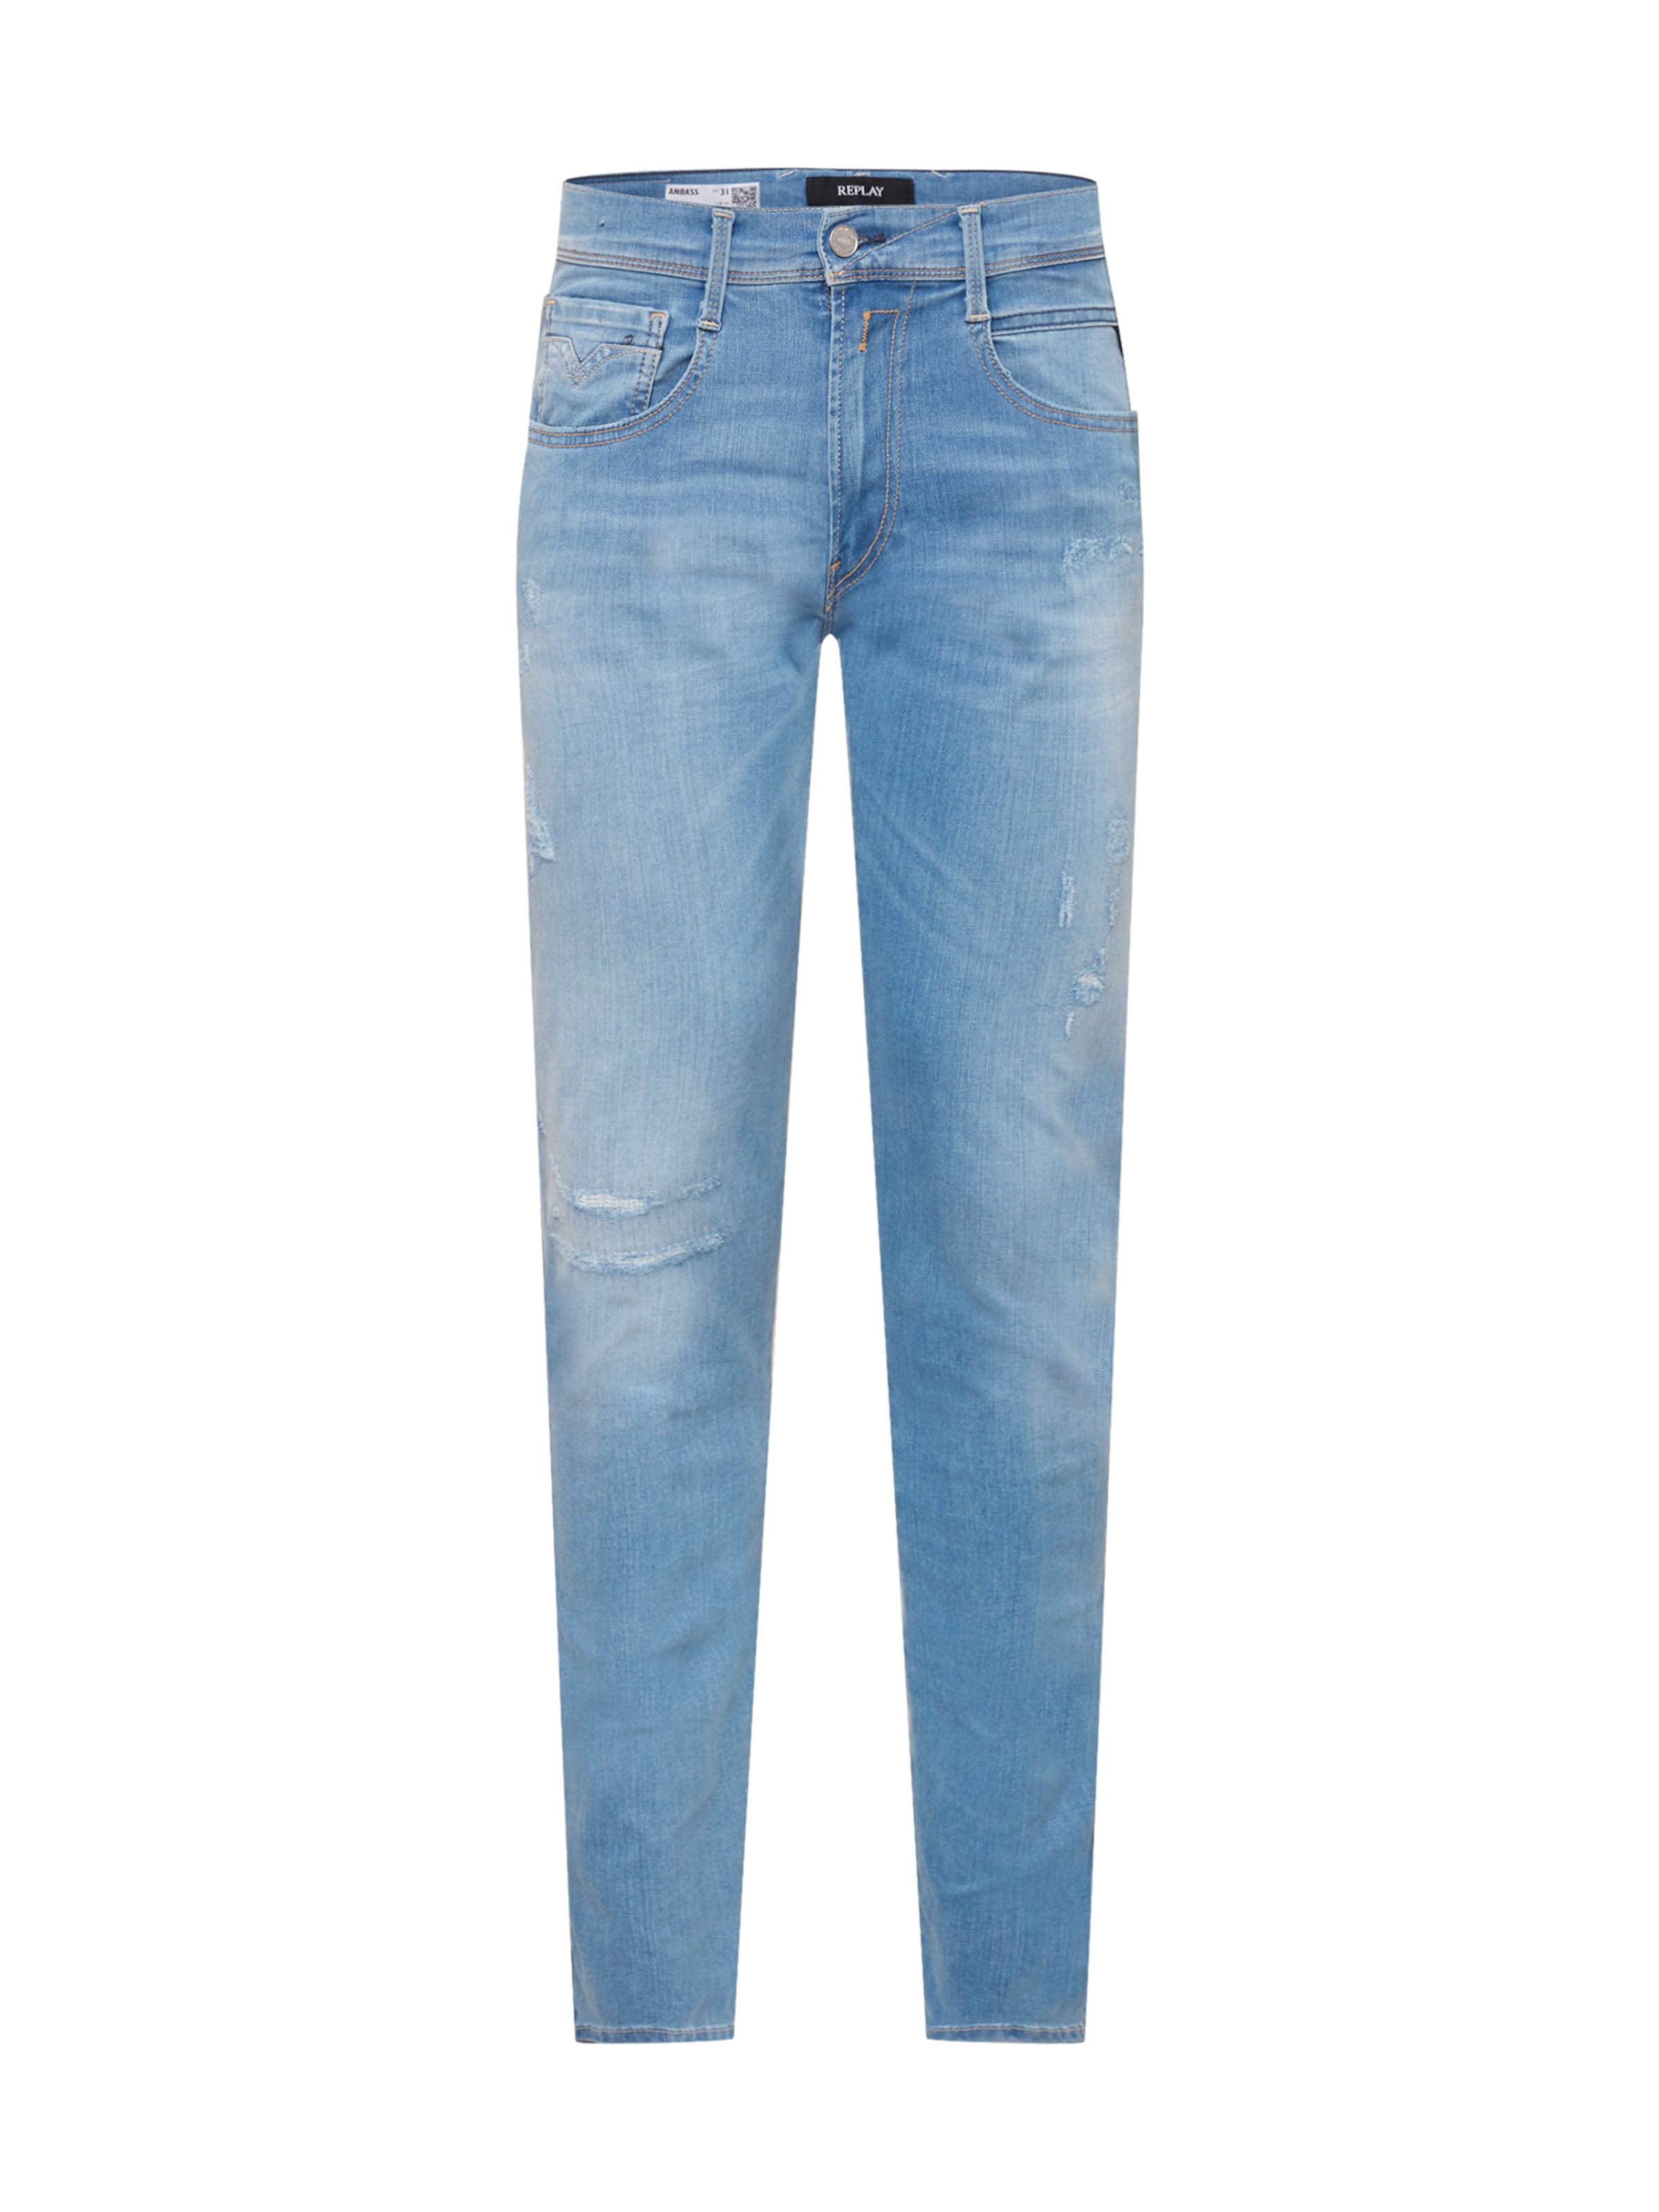 Männer Jeans REPLAY Jeans in Blau - LY82279